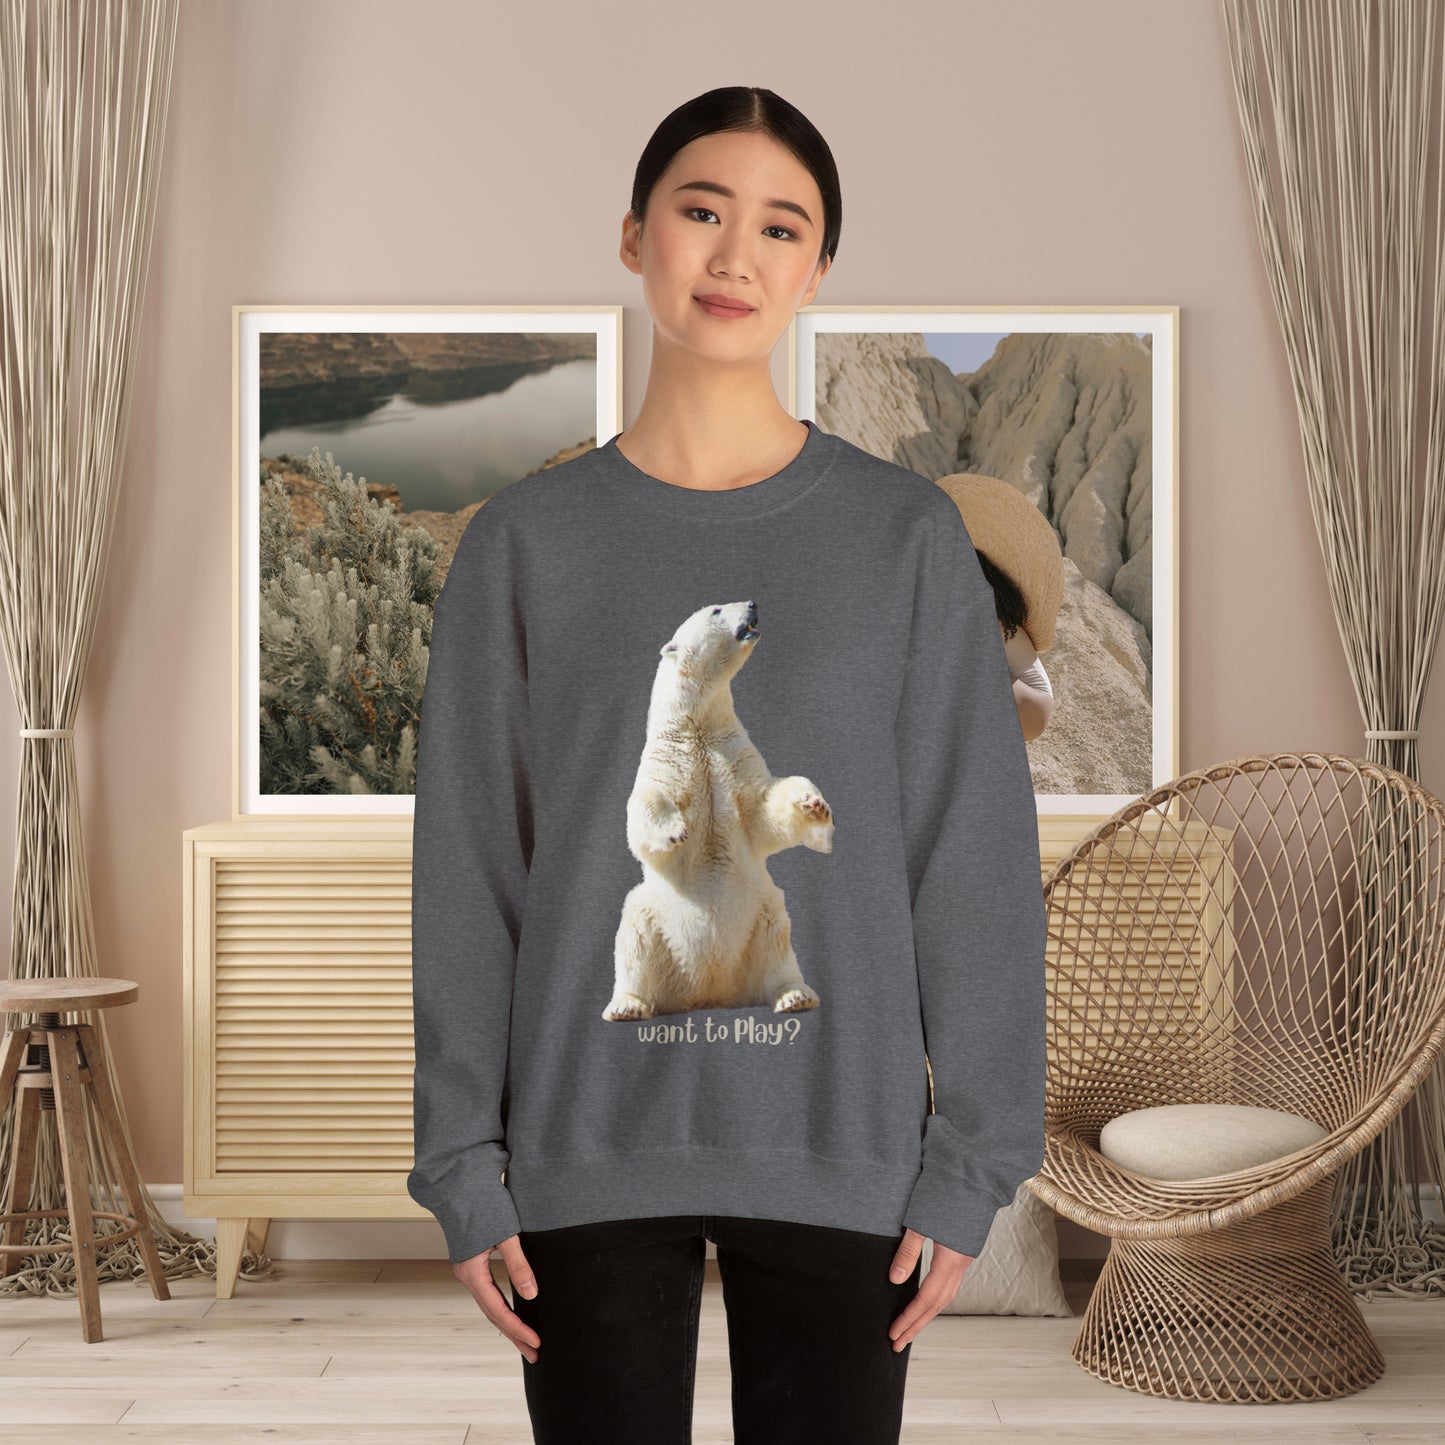 Impressive polar bear asking “Want to play?"! Play like you mean it! Give the gift of this Unisex Heavy Blend™ Crewneck Sweatshirt or get one for yourself.